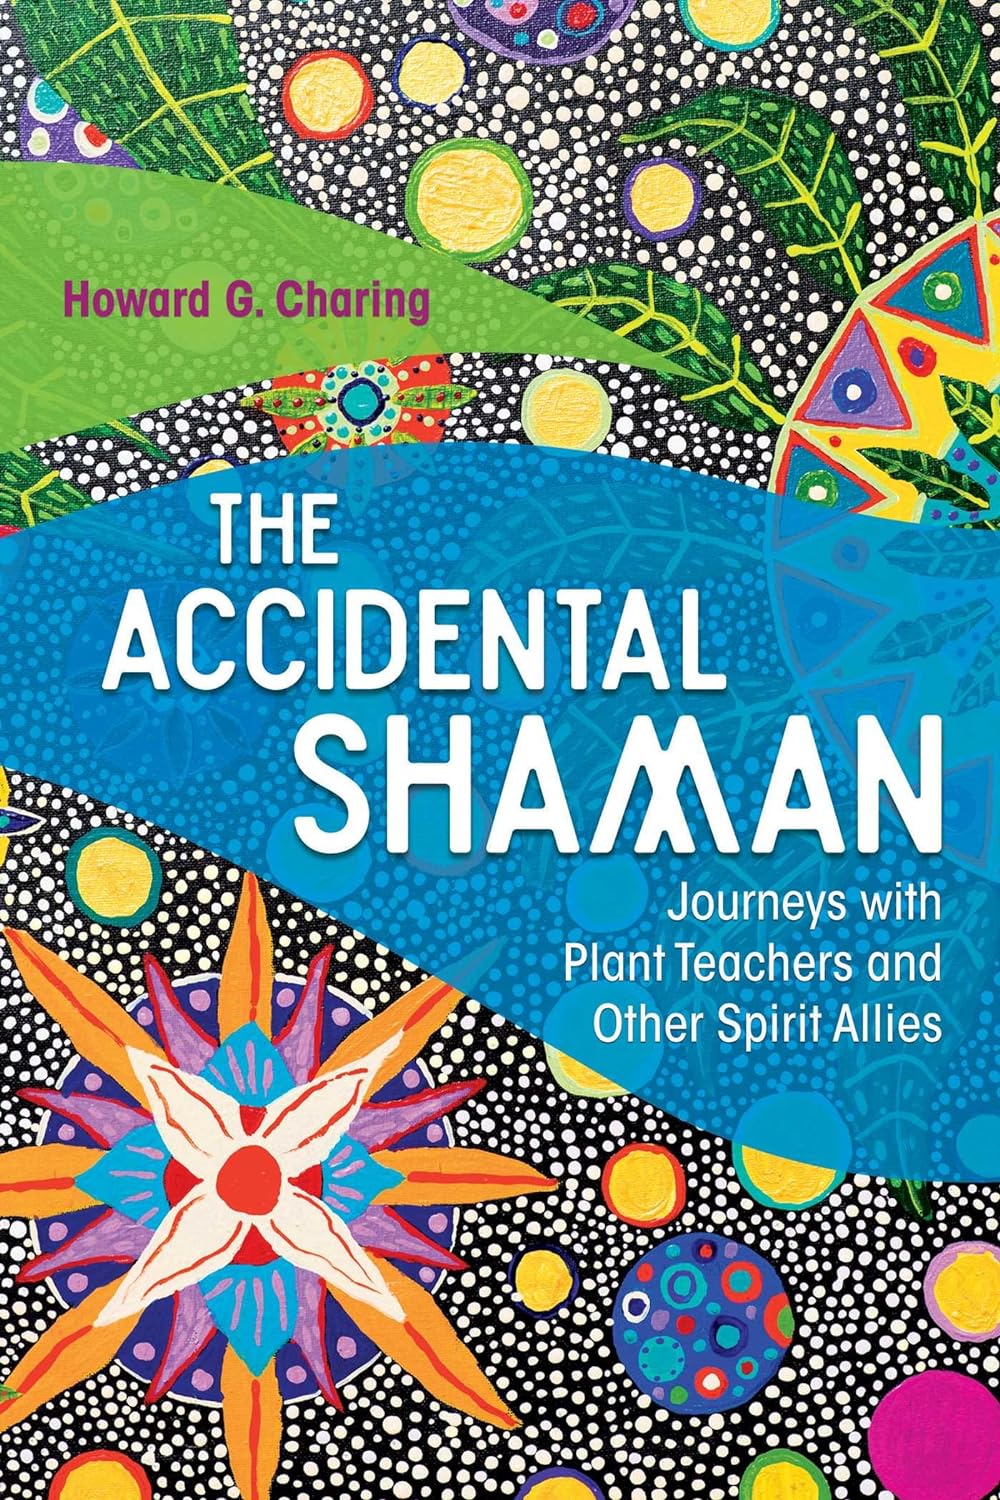 The Accidental Shaman Journeys with Plant teachers and other Spirit Allies